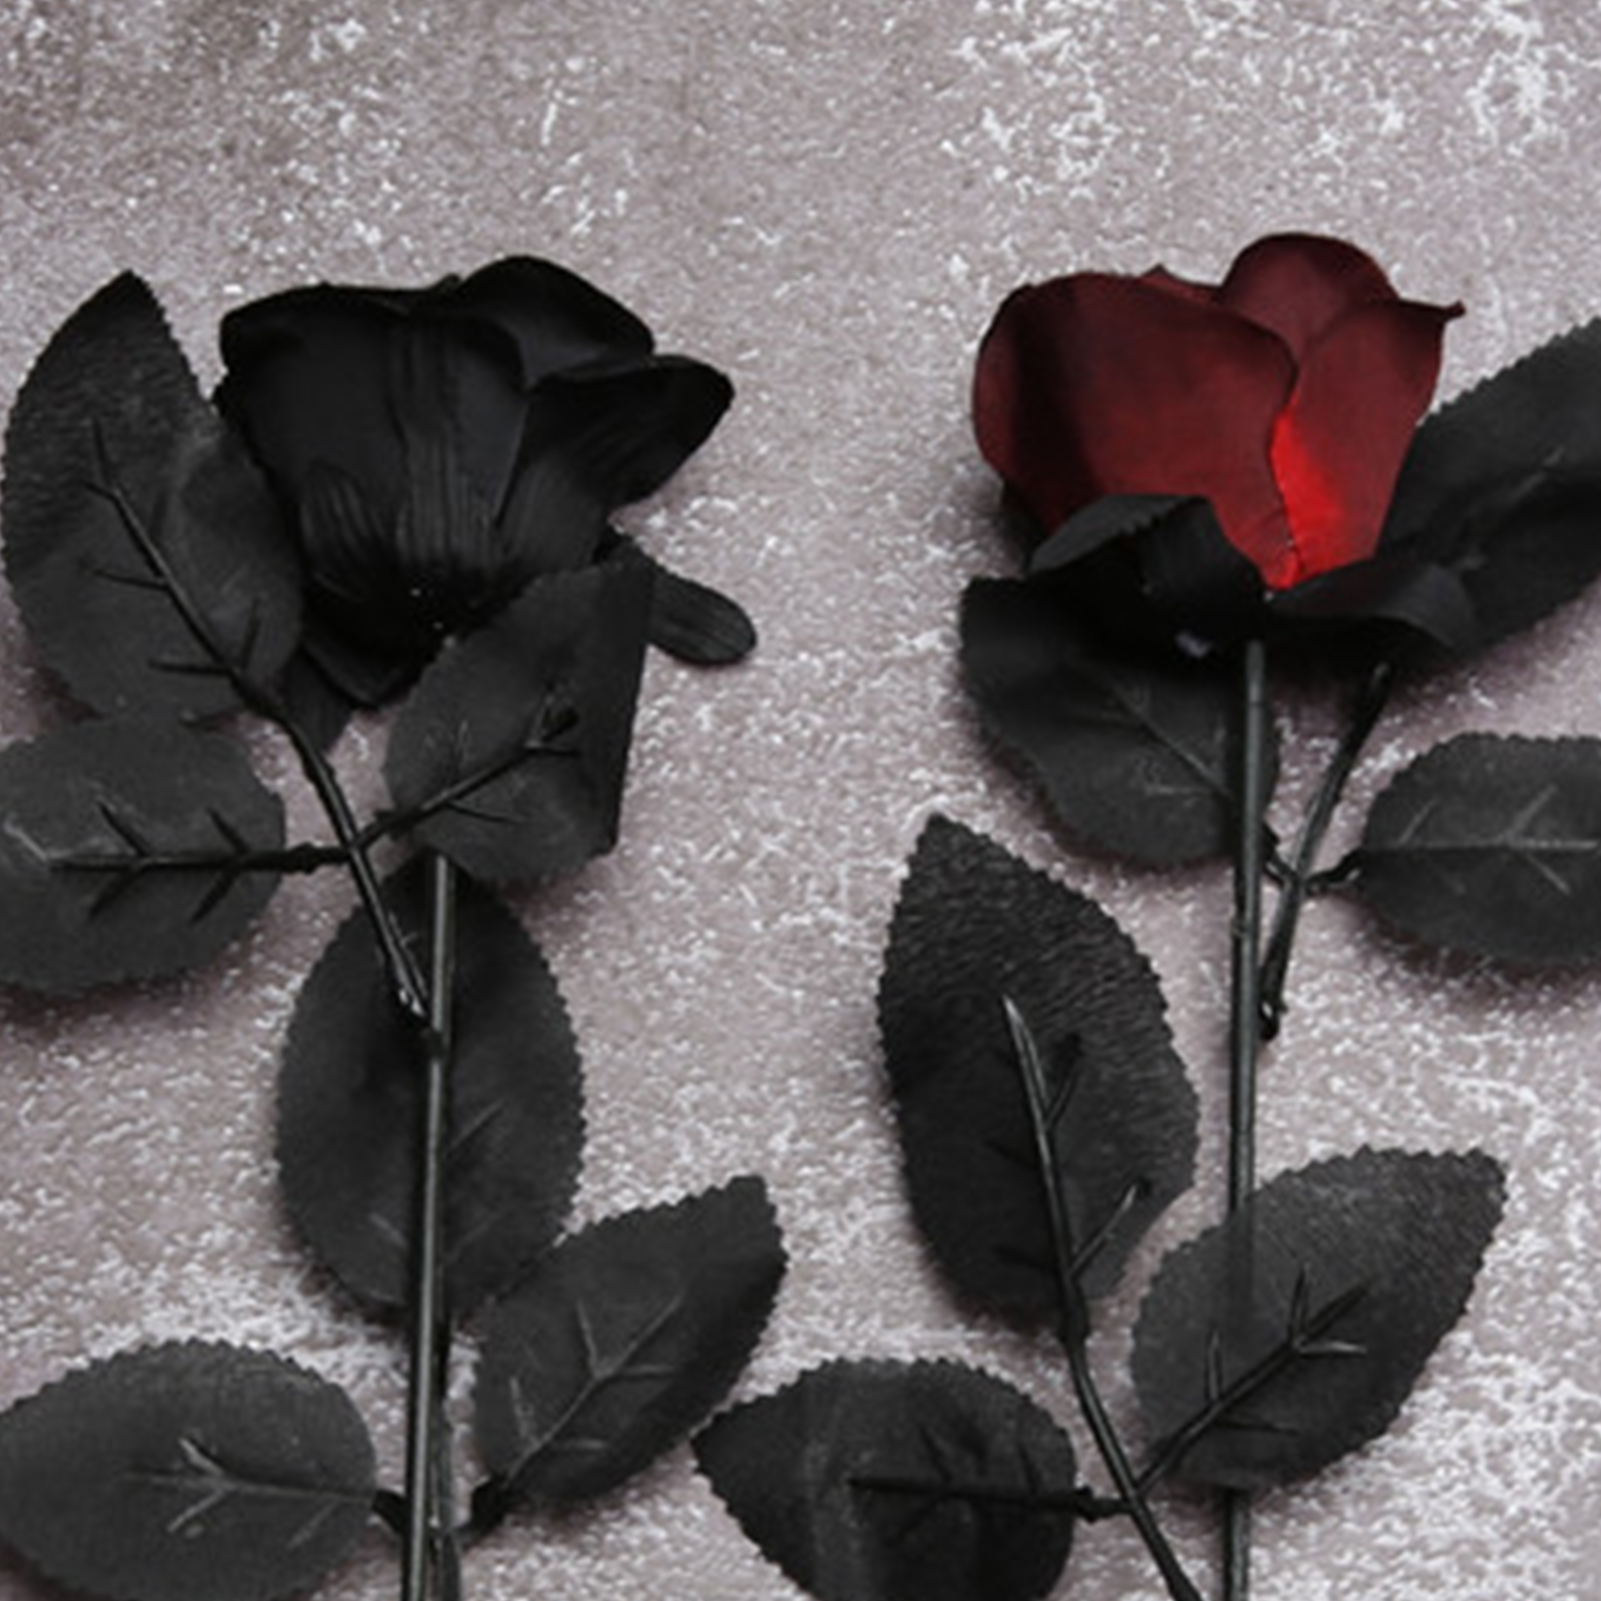 Visland 5 Pcs Black Artificial Silk Rose Petals Flower Decoration with Stems for Product Photography DIY Wedding Bouquets Black/Red Bridal Party